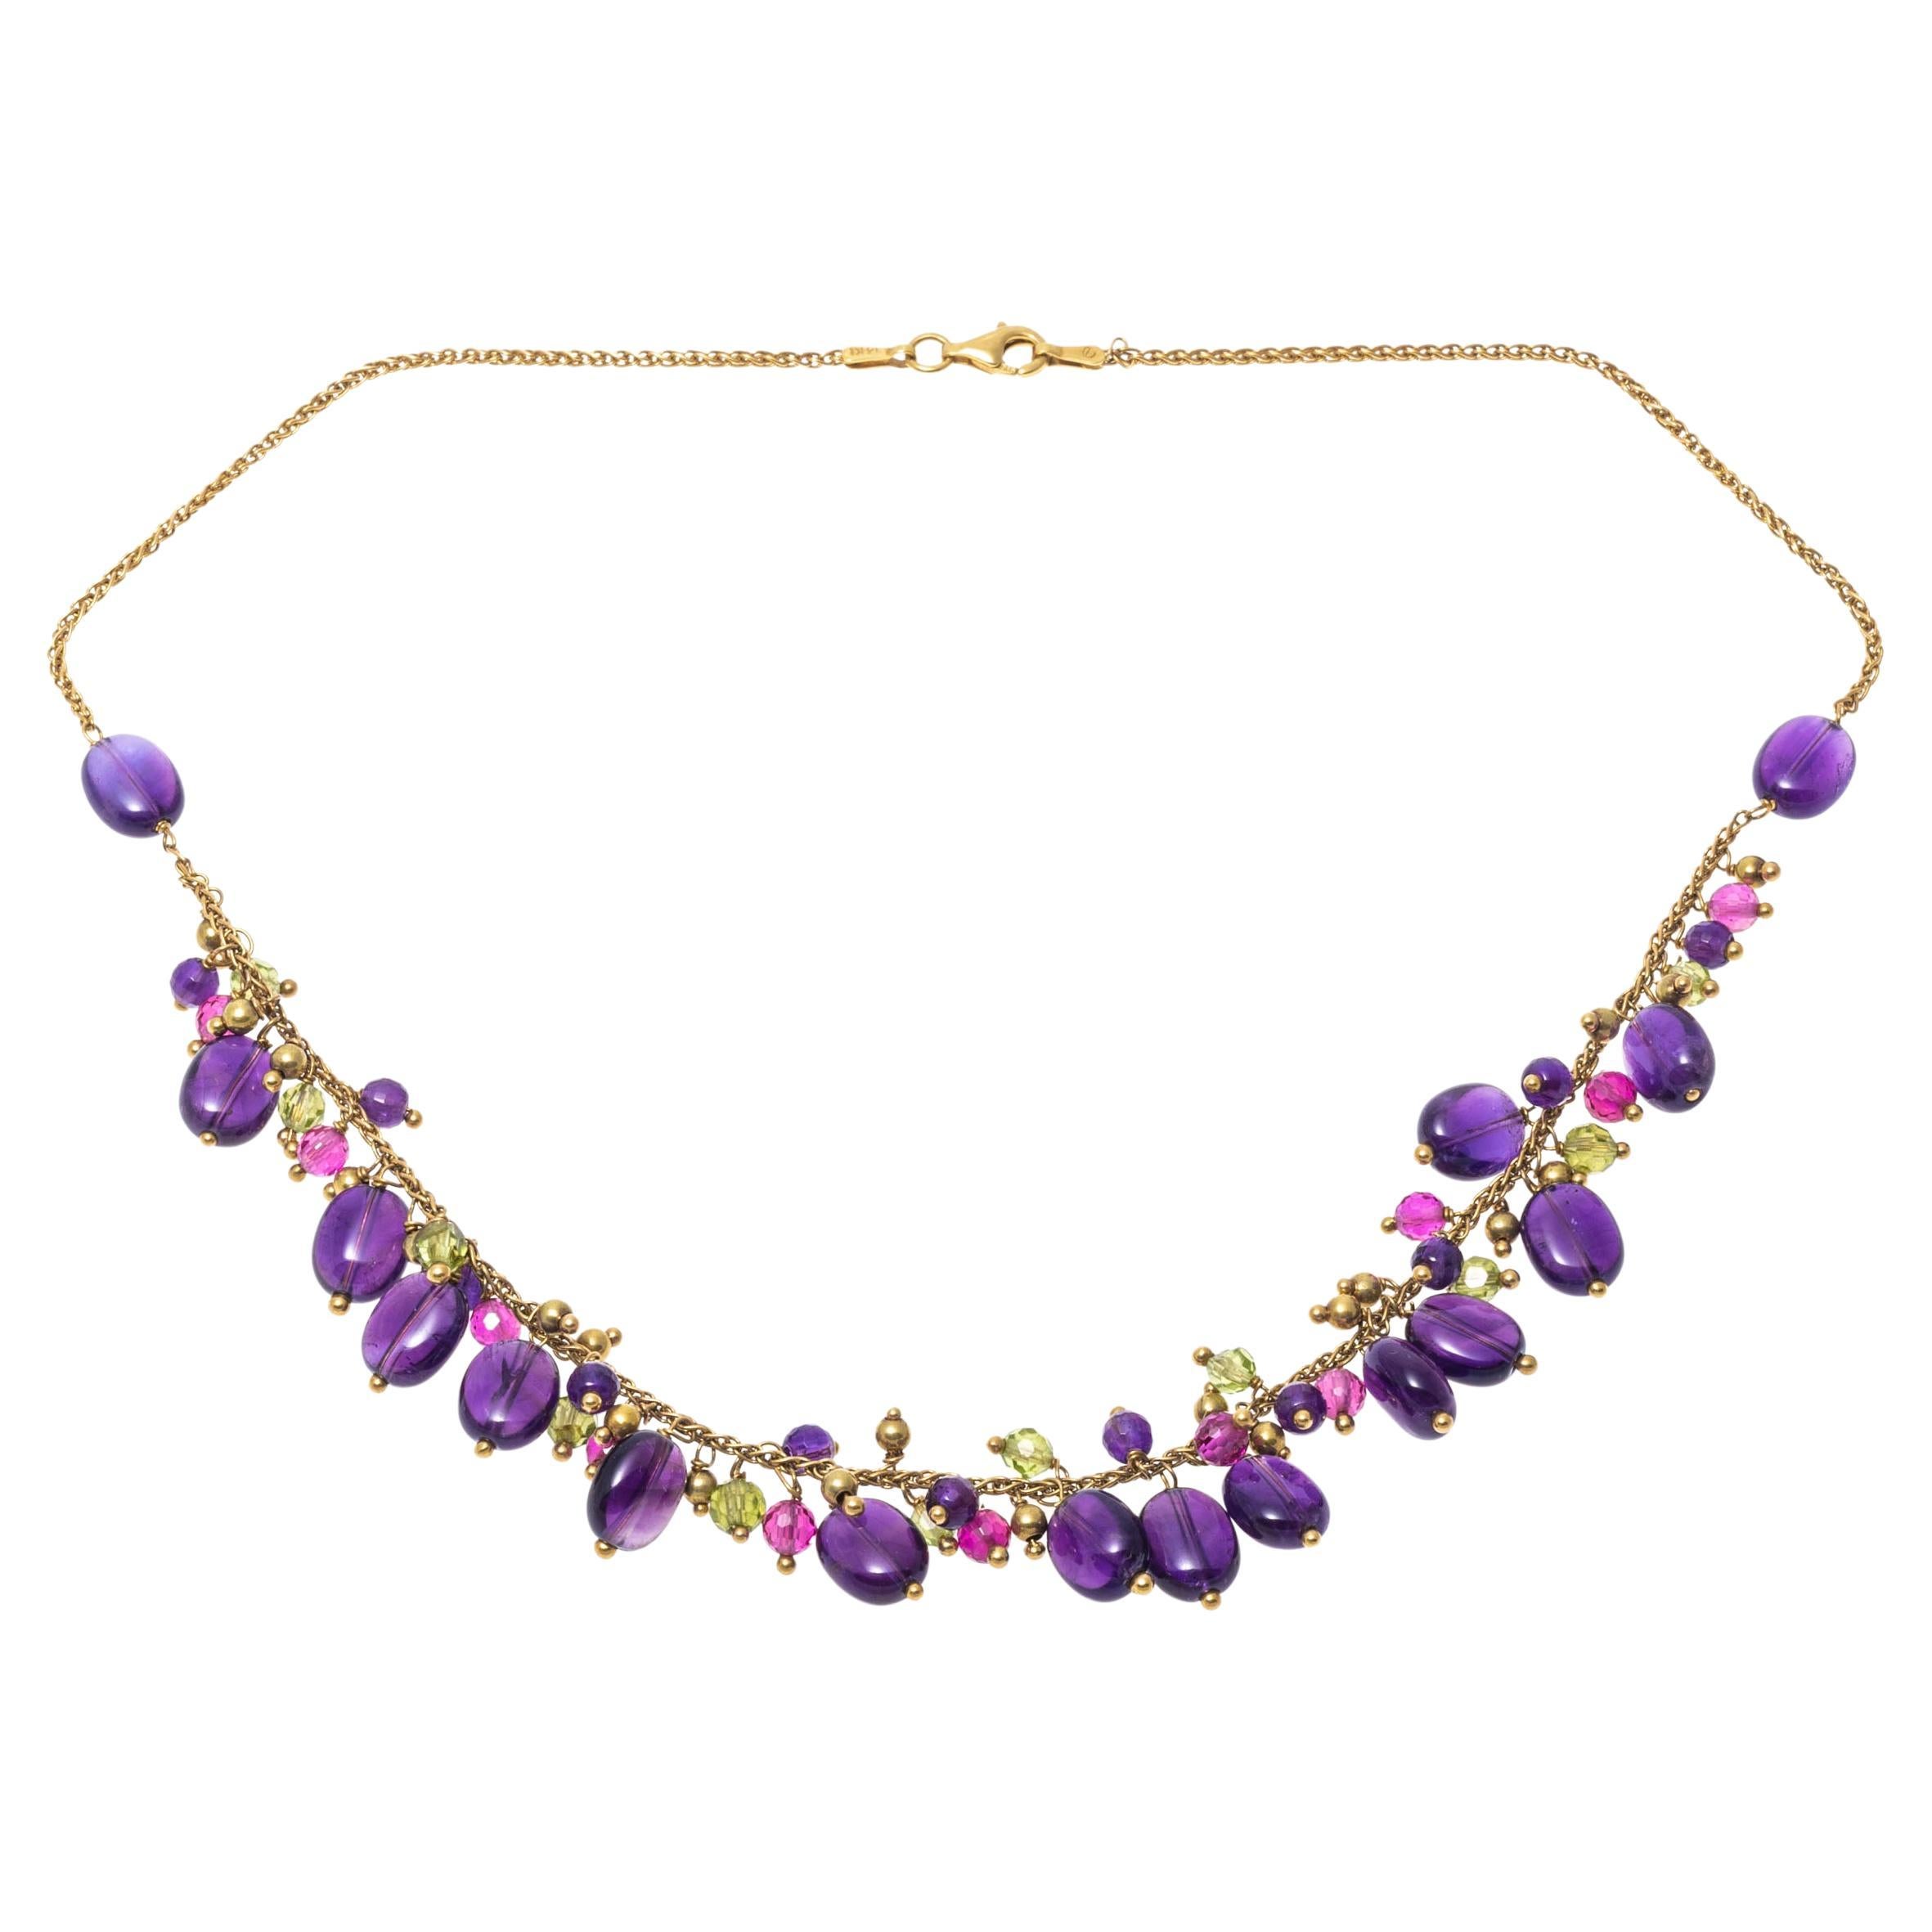 Colorful and unique this wheat style chain necklace presents clusters of stone beads. The beads are crafted from polished rubies, amethysts and peridots. The necklace secures with a lobster claw style clasp.
Marks: 14K Italy
Dimensions: 16 1/2